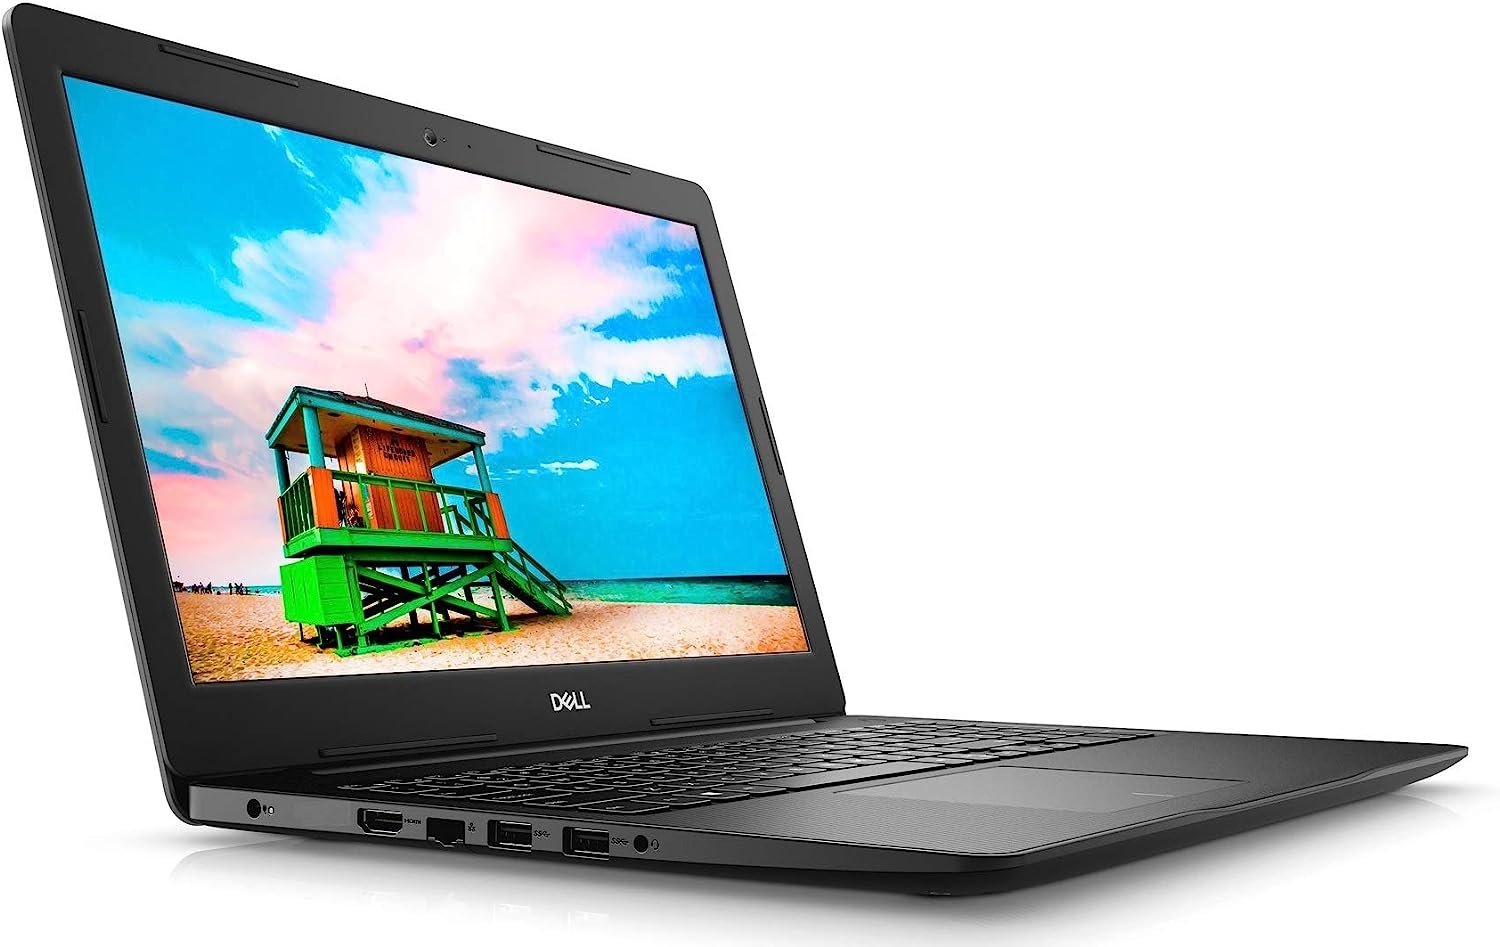 2021 Newest Dell Inspiron 15 3000 Series 3501 Laptop